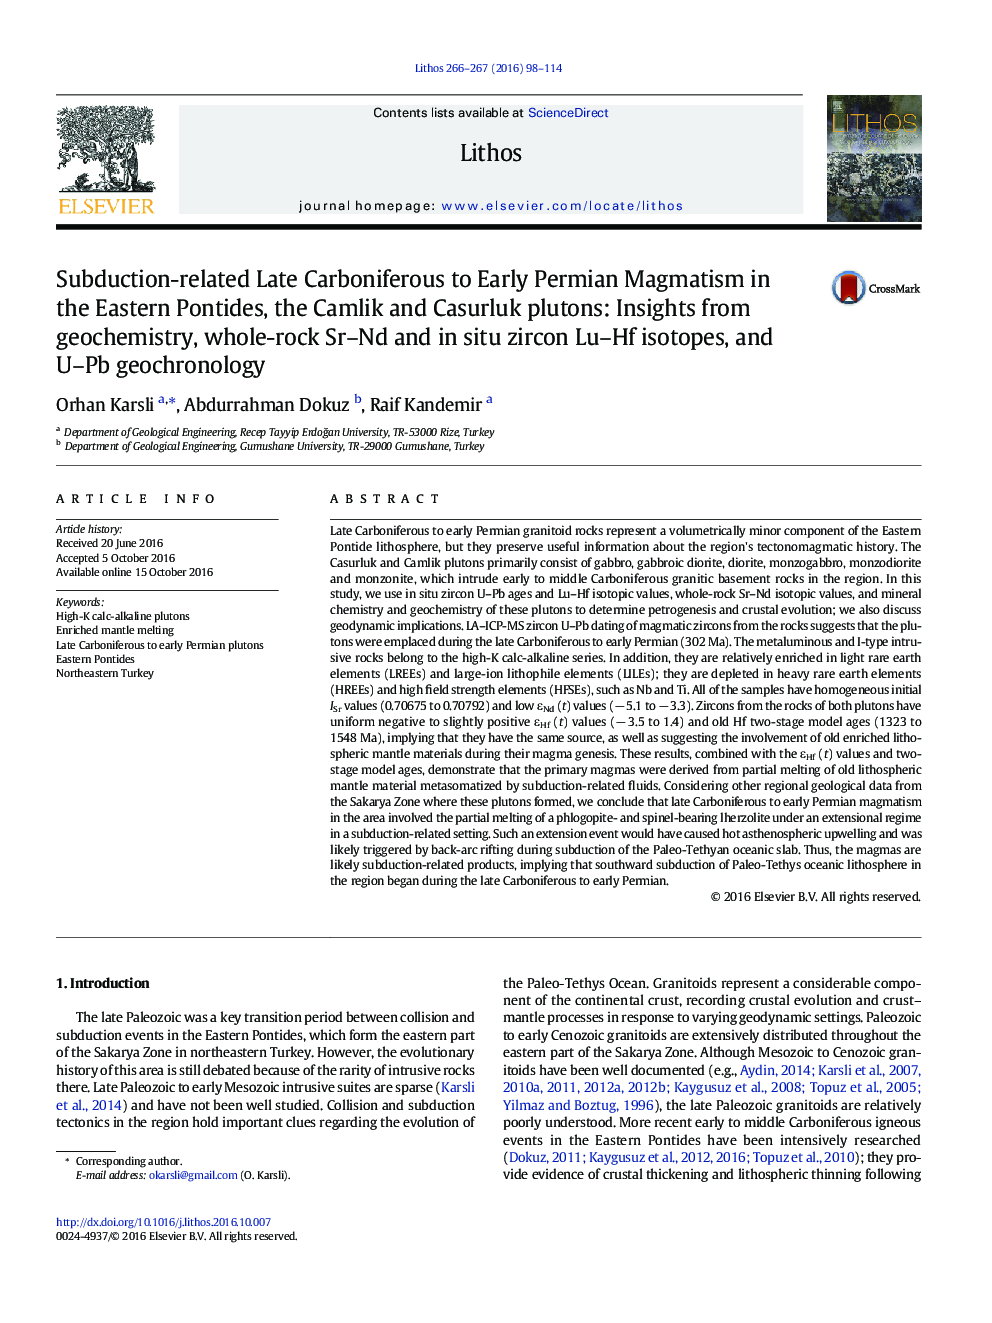 Subduction-related Late Carboniferous to Early Permian Magmatism in the Eastern Pontides, the Camlik and Casurluk plutons: Insights from geochemistry, whole-rock Sr–Nd and in situ zircon Lu–Hf isotopes, and U–Pb geochronology